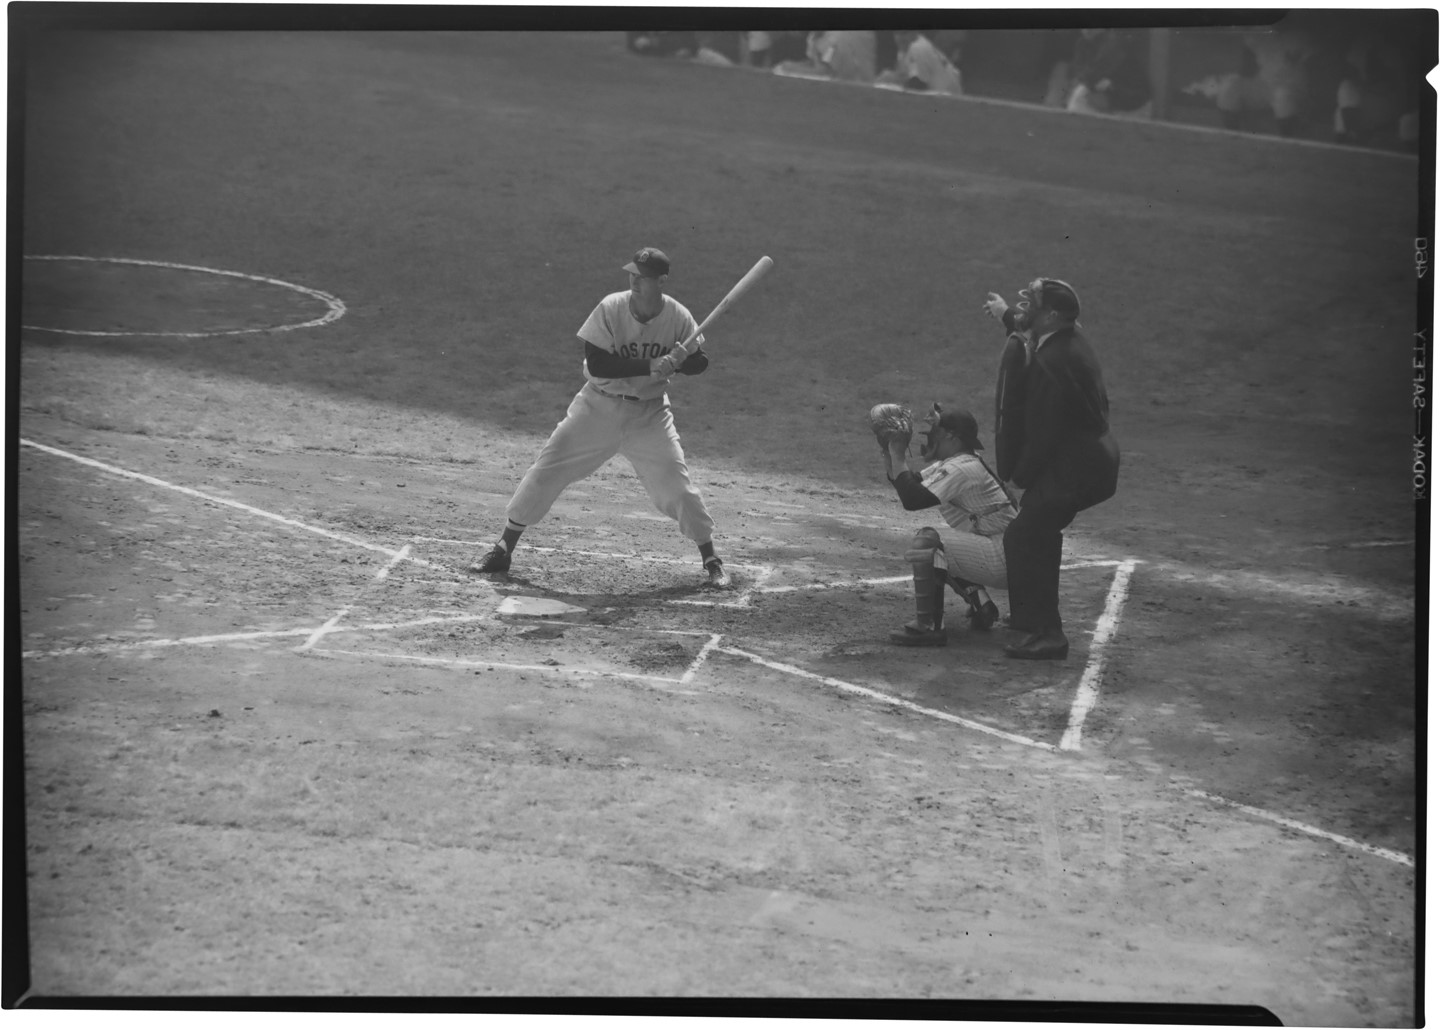 The Brown Brothers Collection - Ted Williams at Bat Original Negative